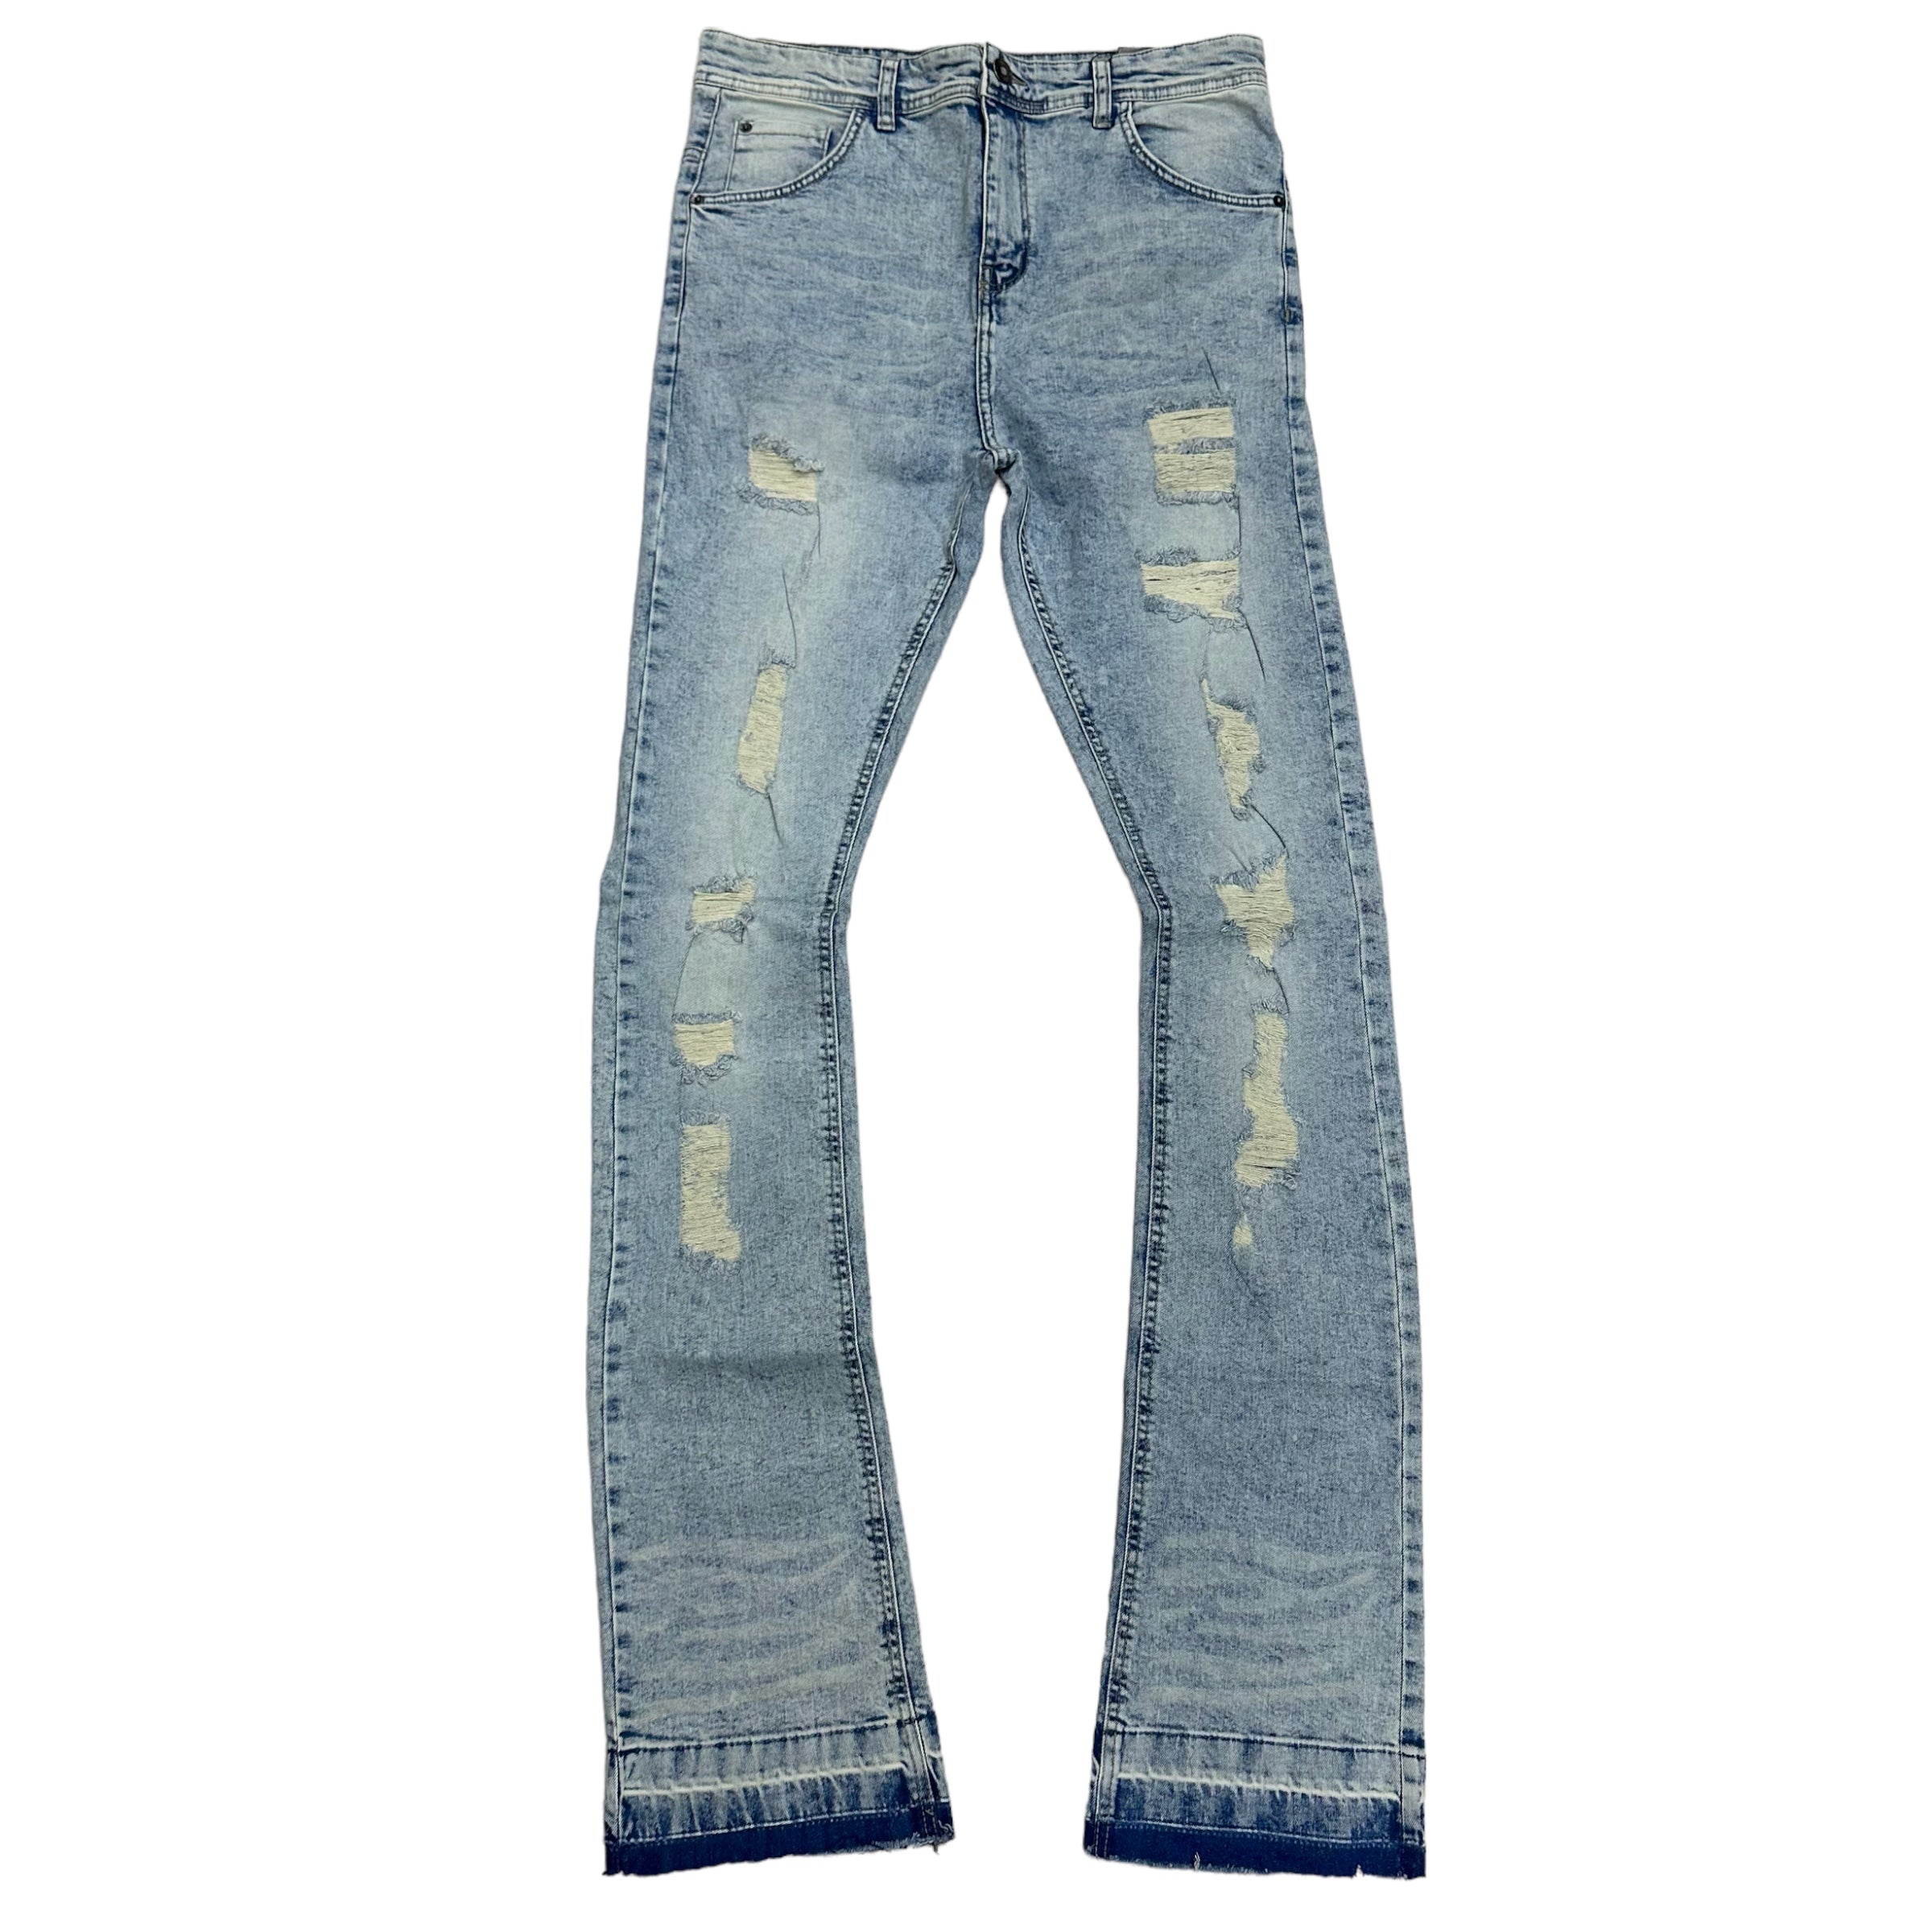 Narr Stacked Rips Ice Blue Denim 3207